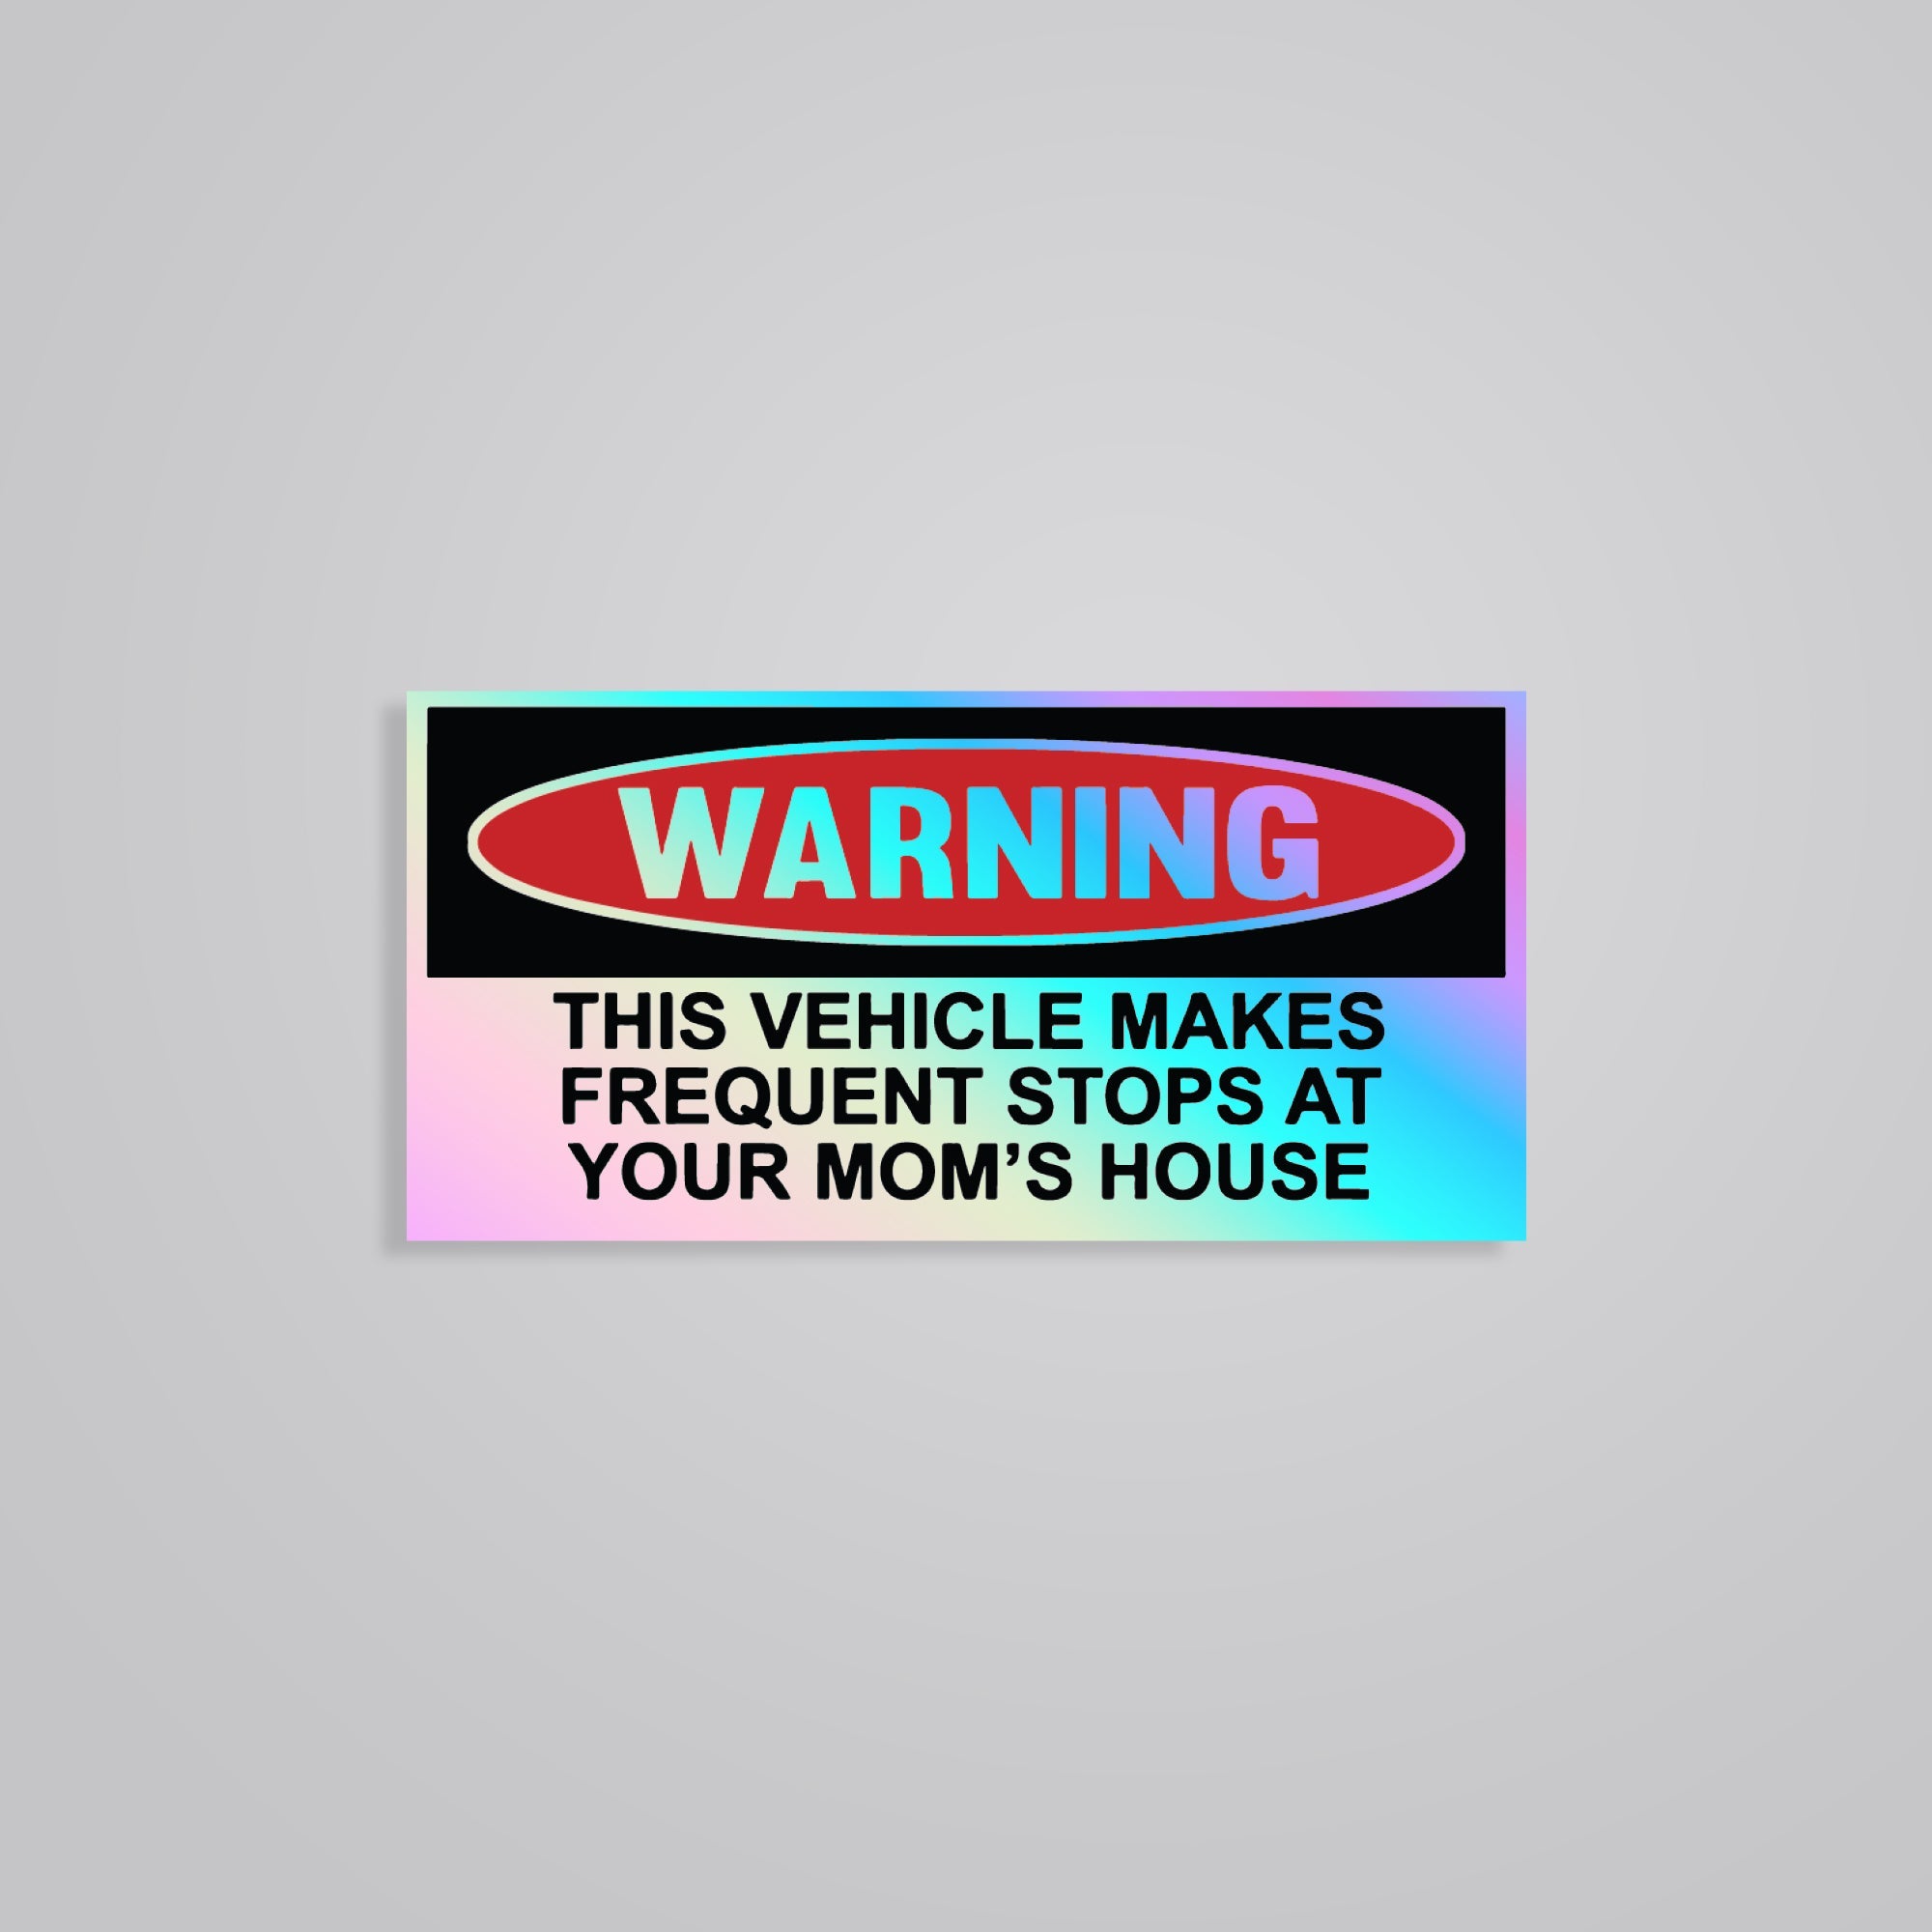 Fomo Store Holographic Stickers Cars & Bikes This Vehicle Makes Frequent Stops At Your Mom's 